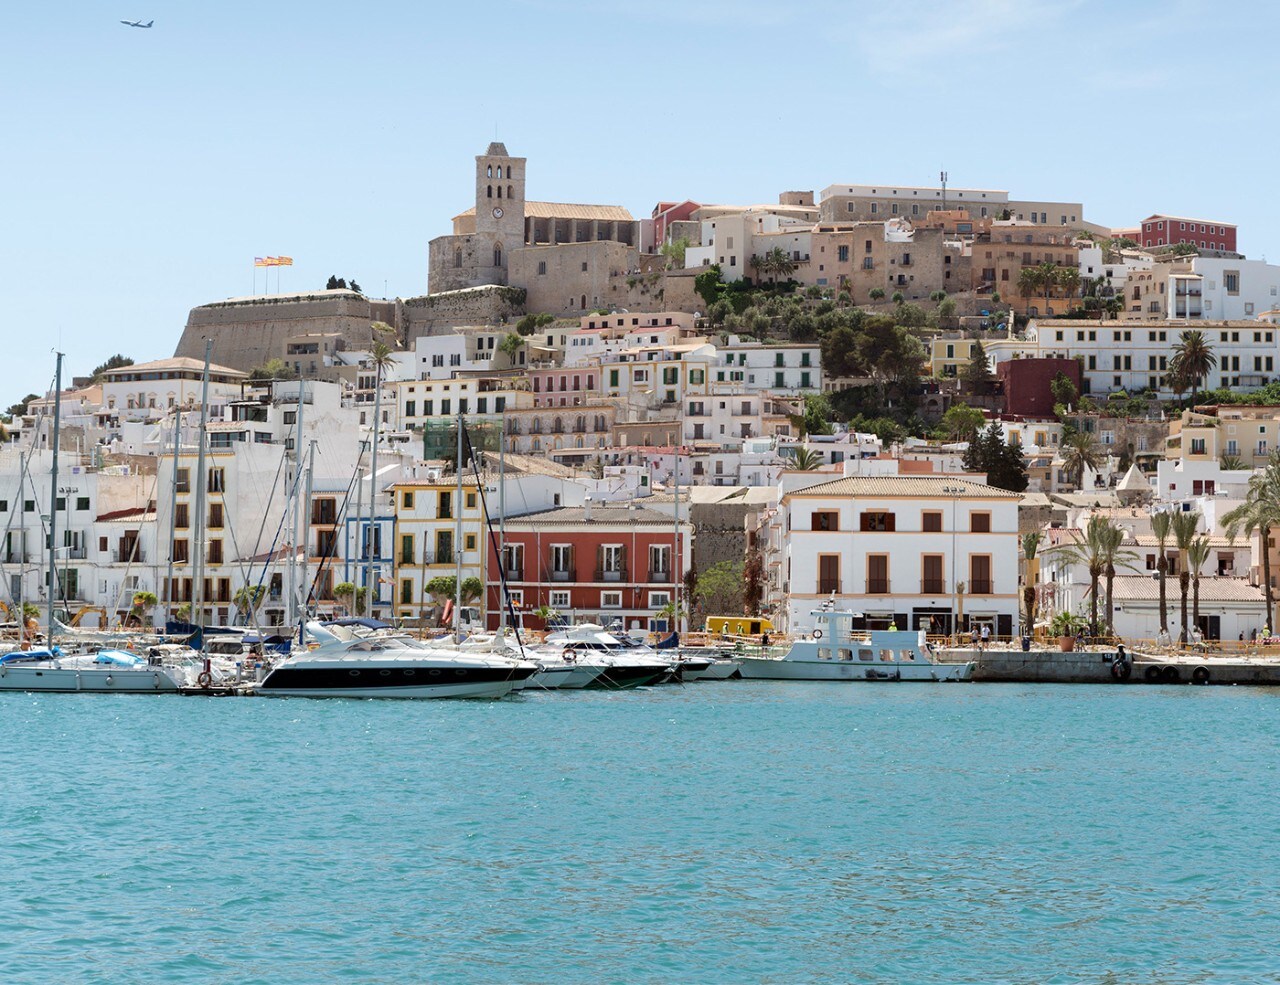 View of Ibiza town from the sea with Dalt Vila on the top of the hill